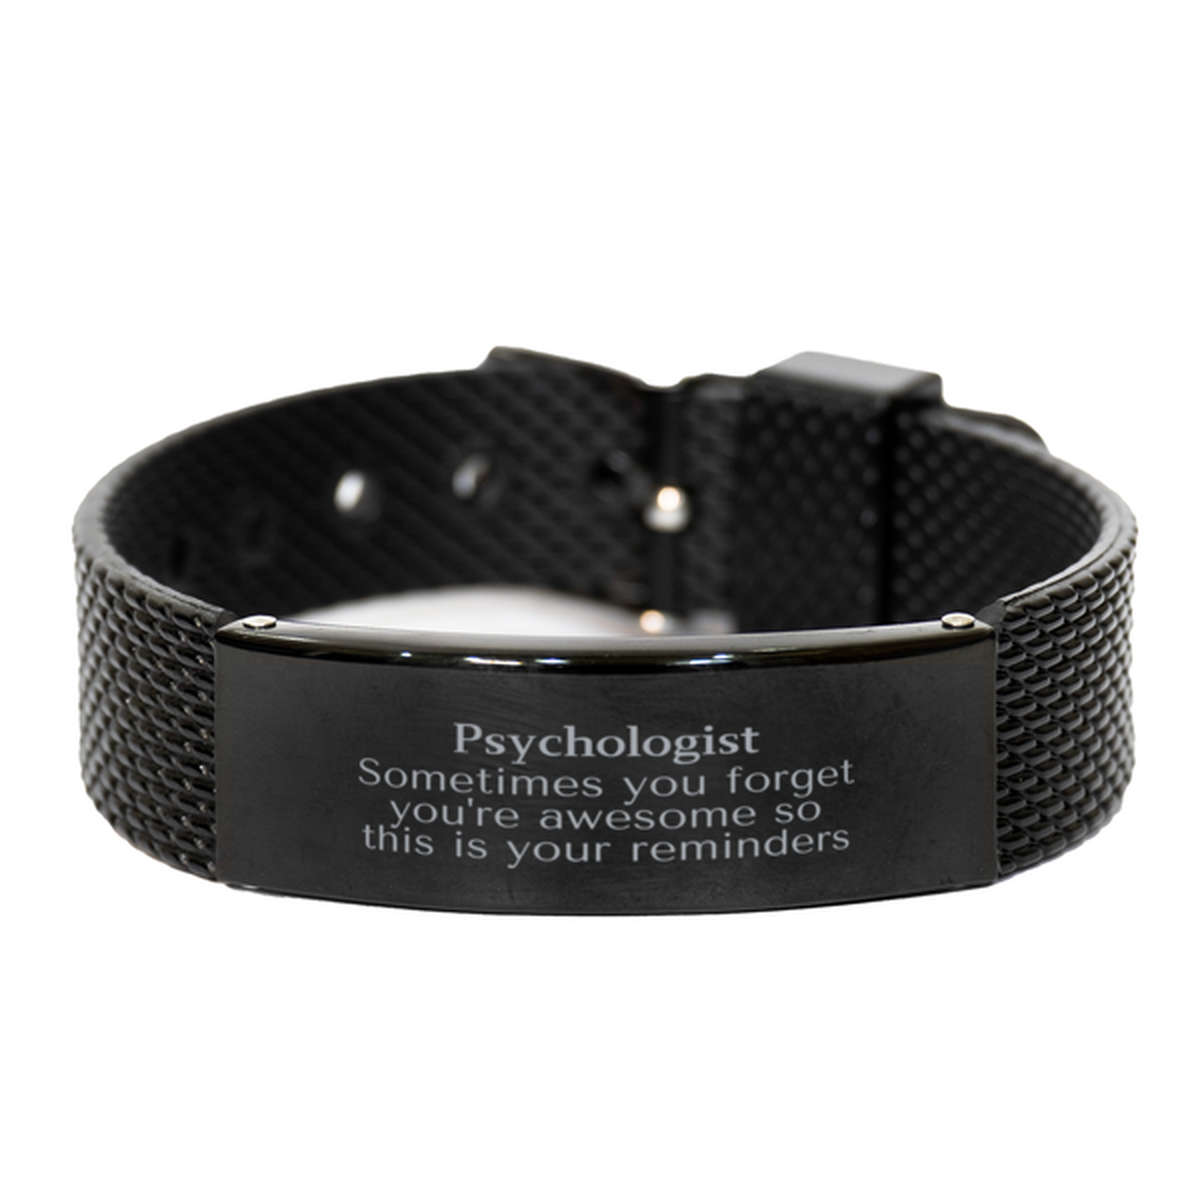 Sentimental Psychologist Black Shark Mesh Bracelet, Psychologist Sometimes you forget you're awesome so this is your reminders, Graduation Christmas Birthday Gifts for Psychologist, Men, Women, Coworkers